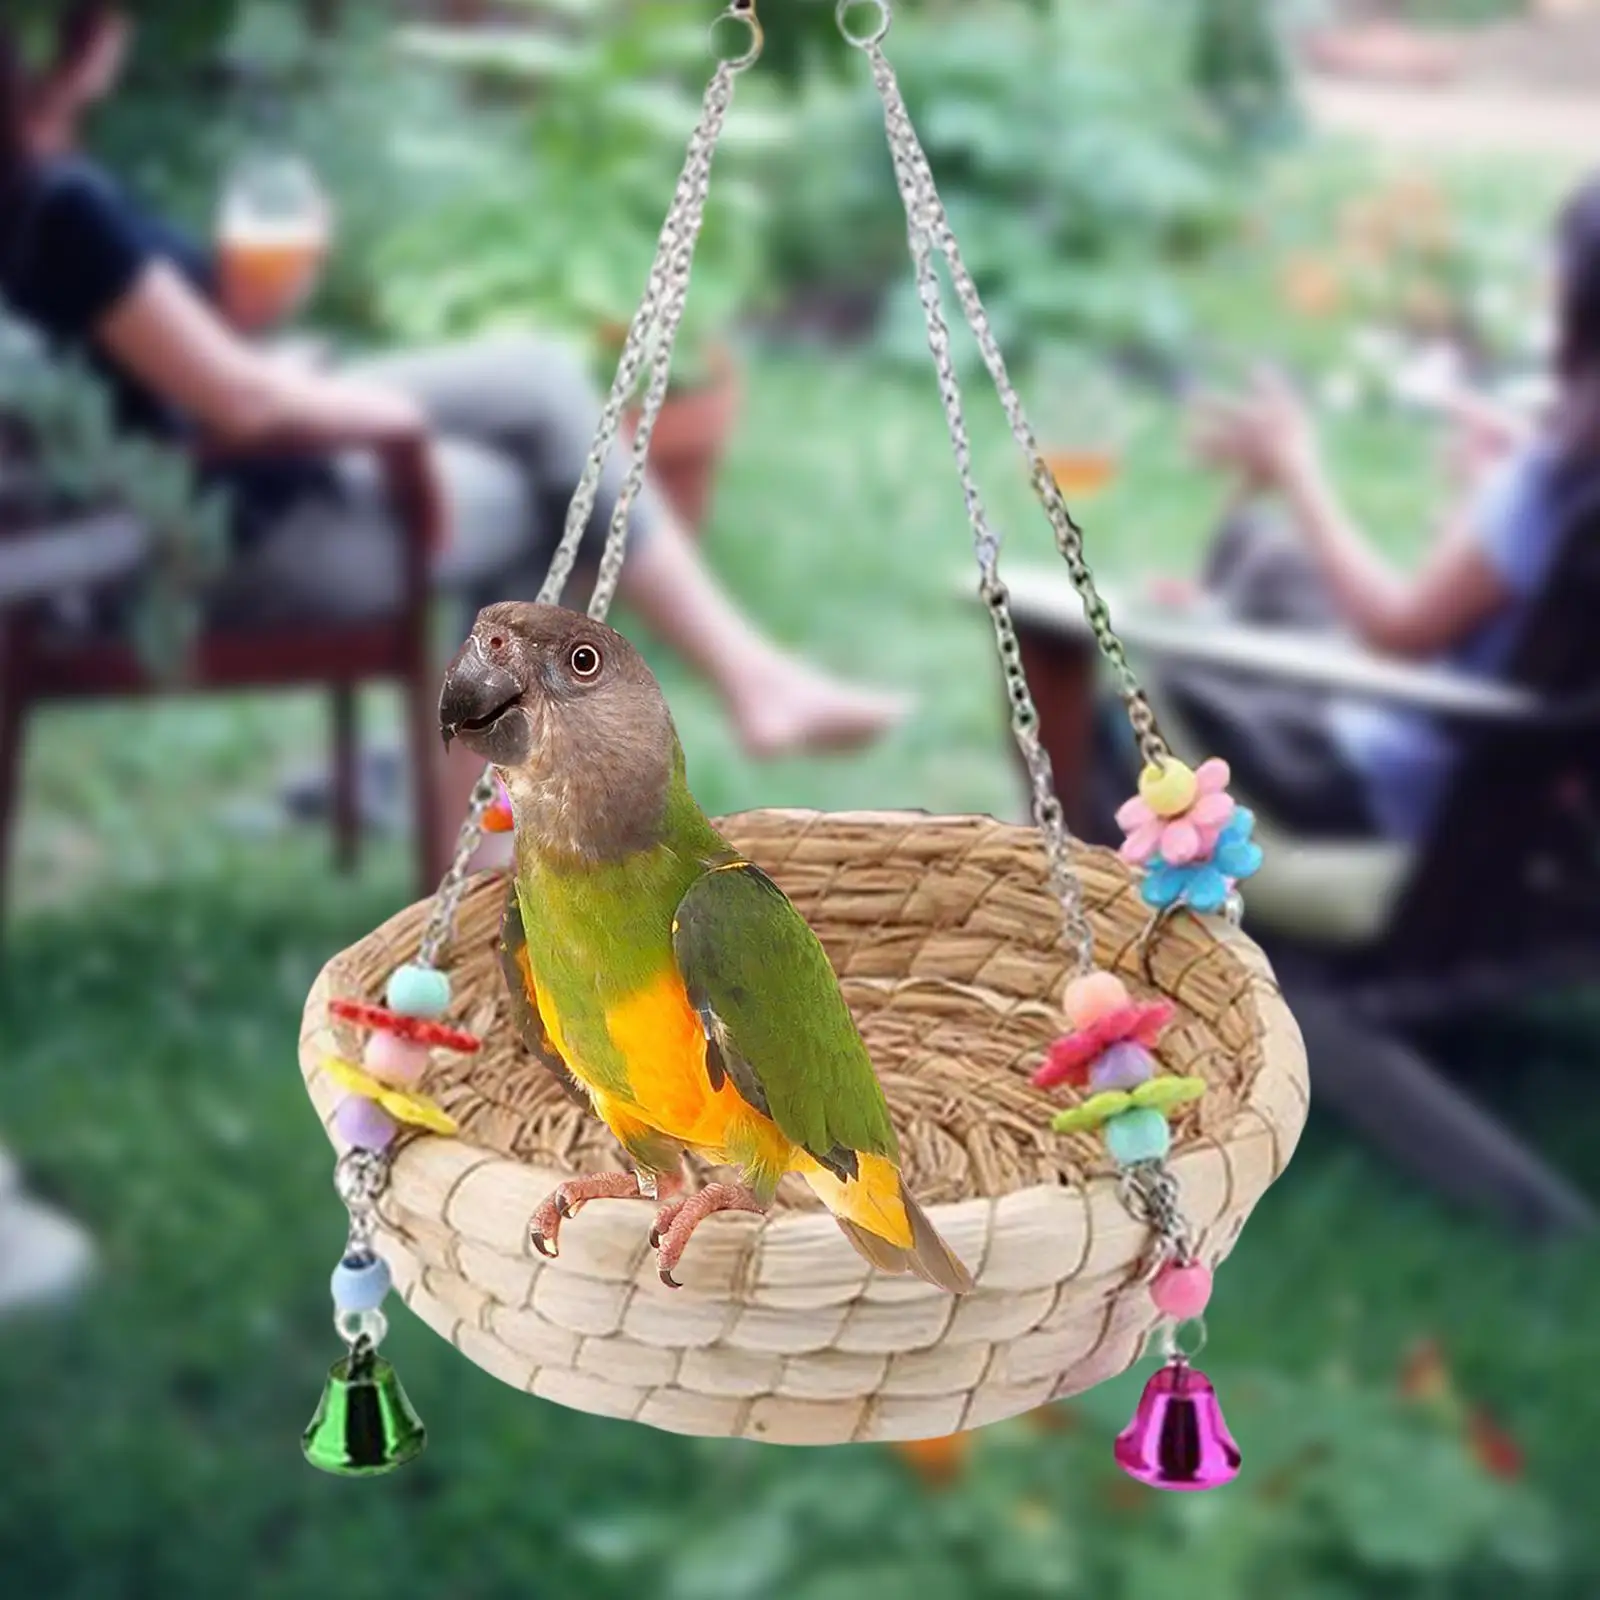 Home Bird Straws Swing Toy Woven Straw Lightweight Stable Parrot Toys Nest Bed for Cockatiel Finches Bird Budgie Climbing